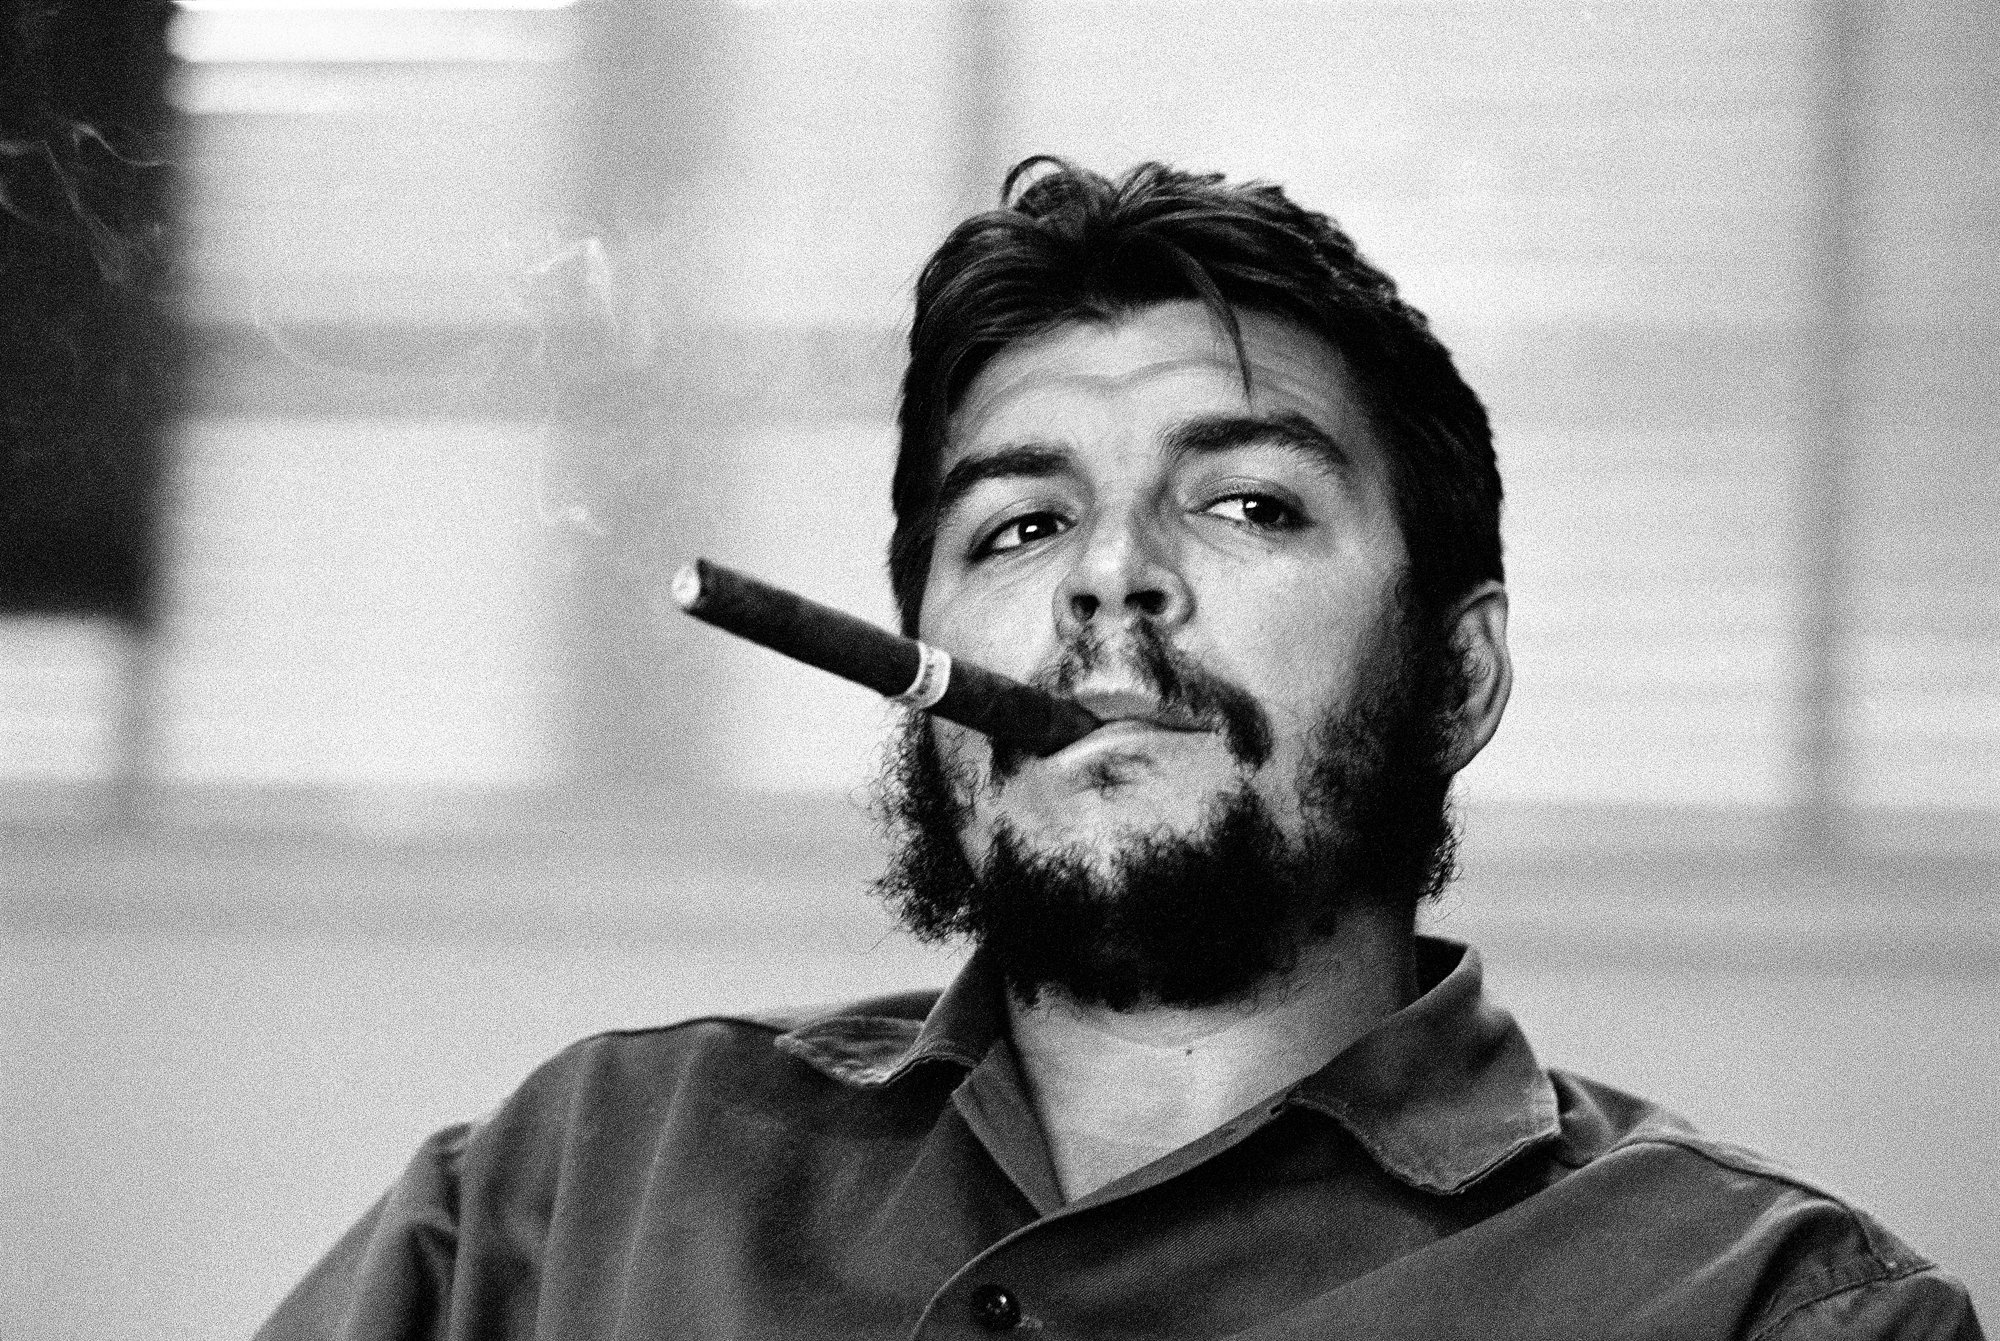 Che Guevara Backgrounds, Compatible - PC, Mobile, Gadgets| 2000x1341 px